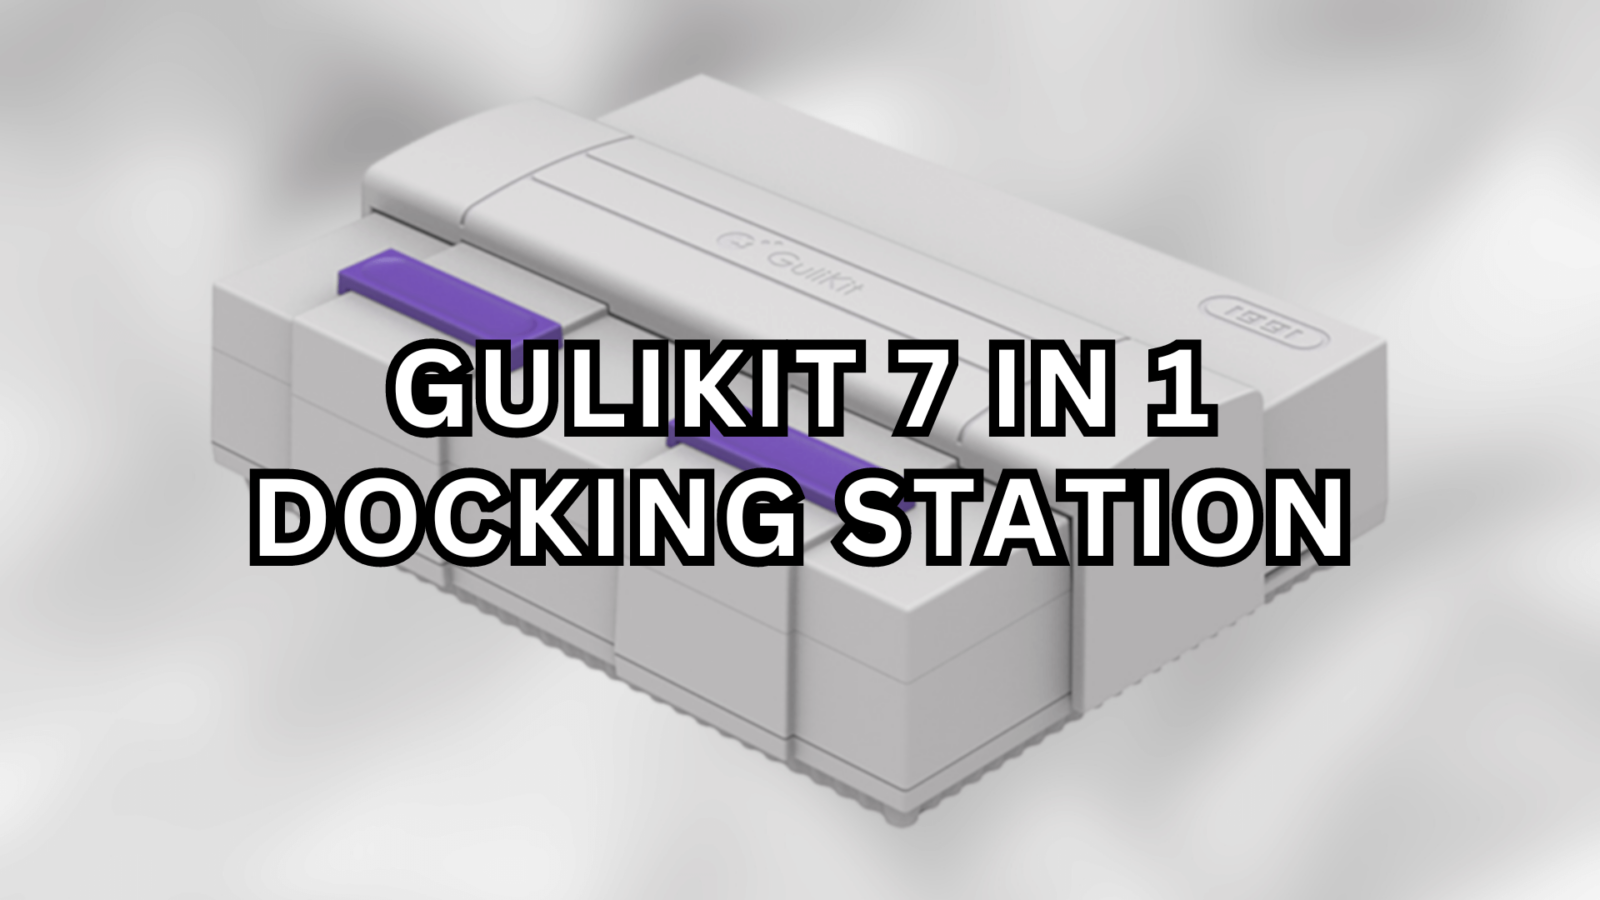 Getting Started with the GuliKit 7 in 1 Docking Station